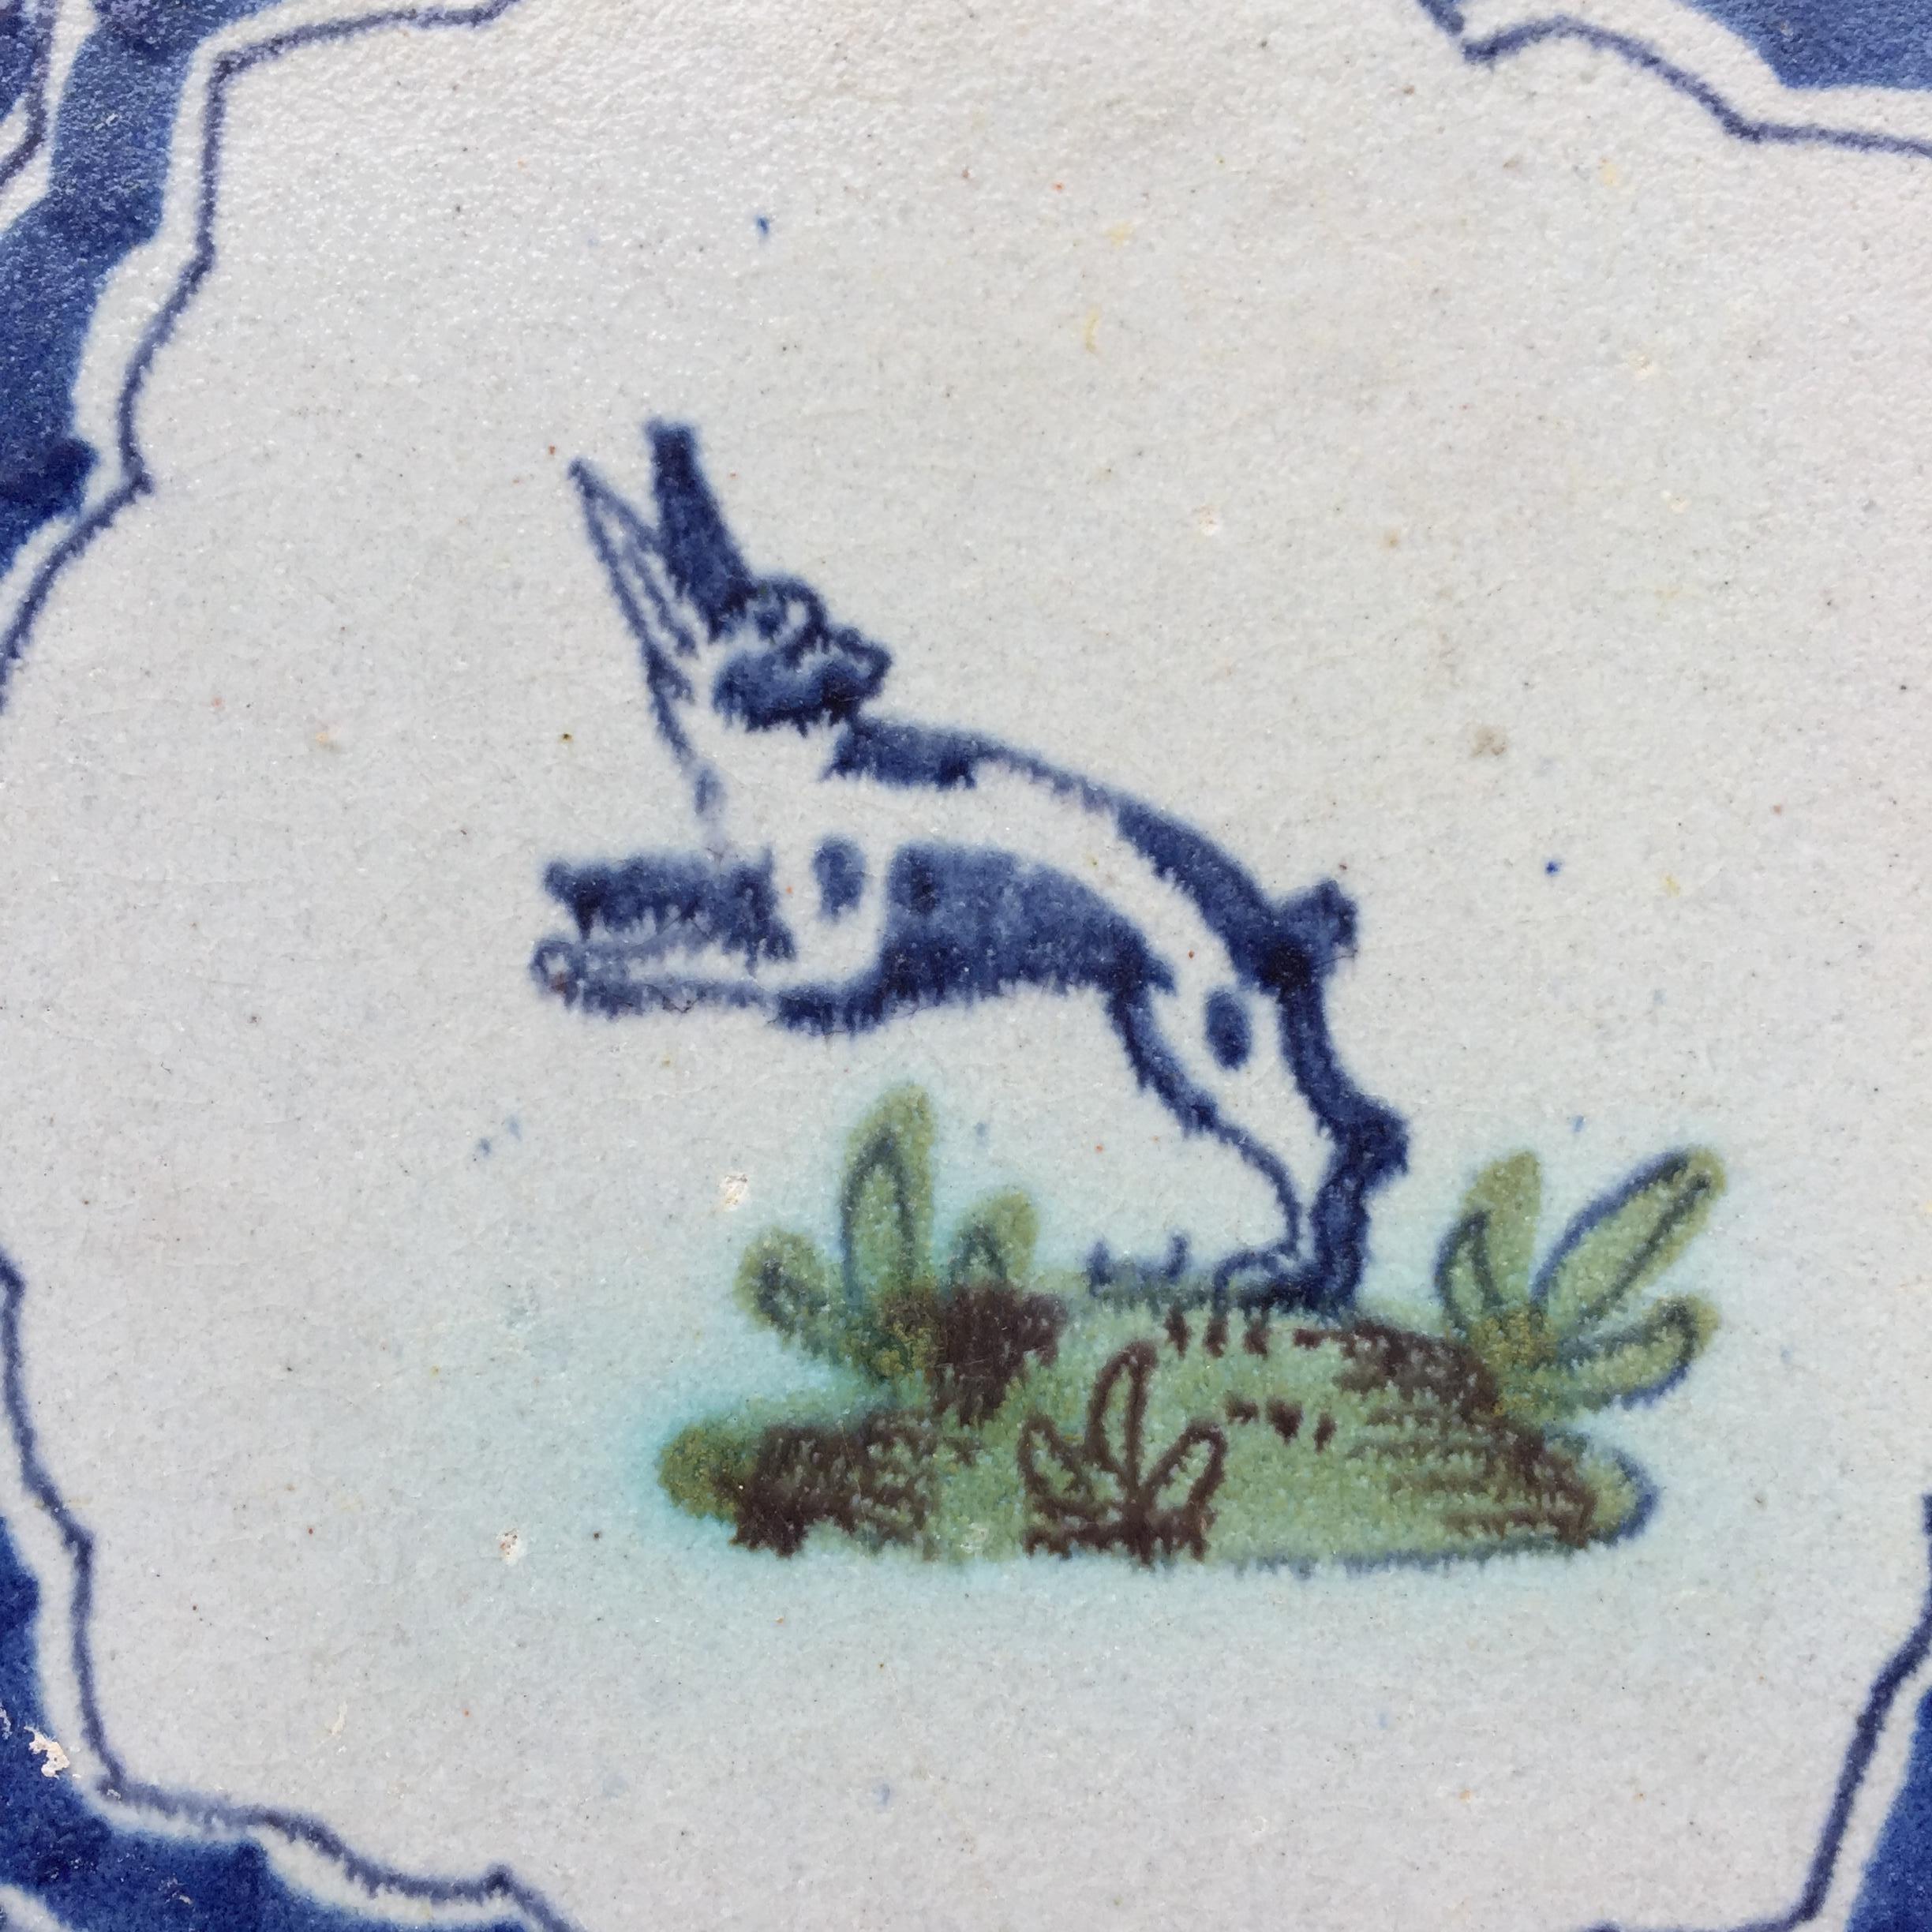 Baroque Blue and White Dutch Delft Tile with Hare, Mid 17th Century